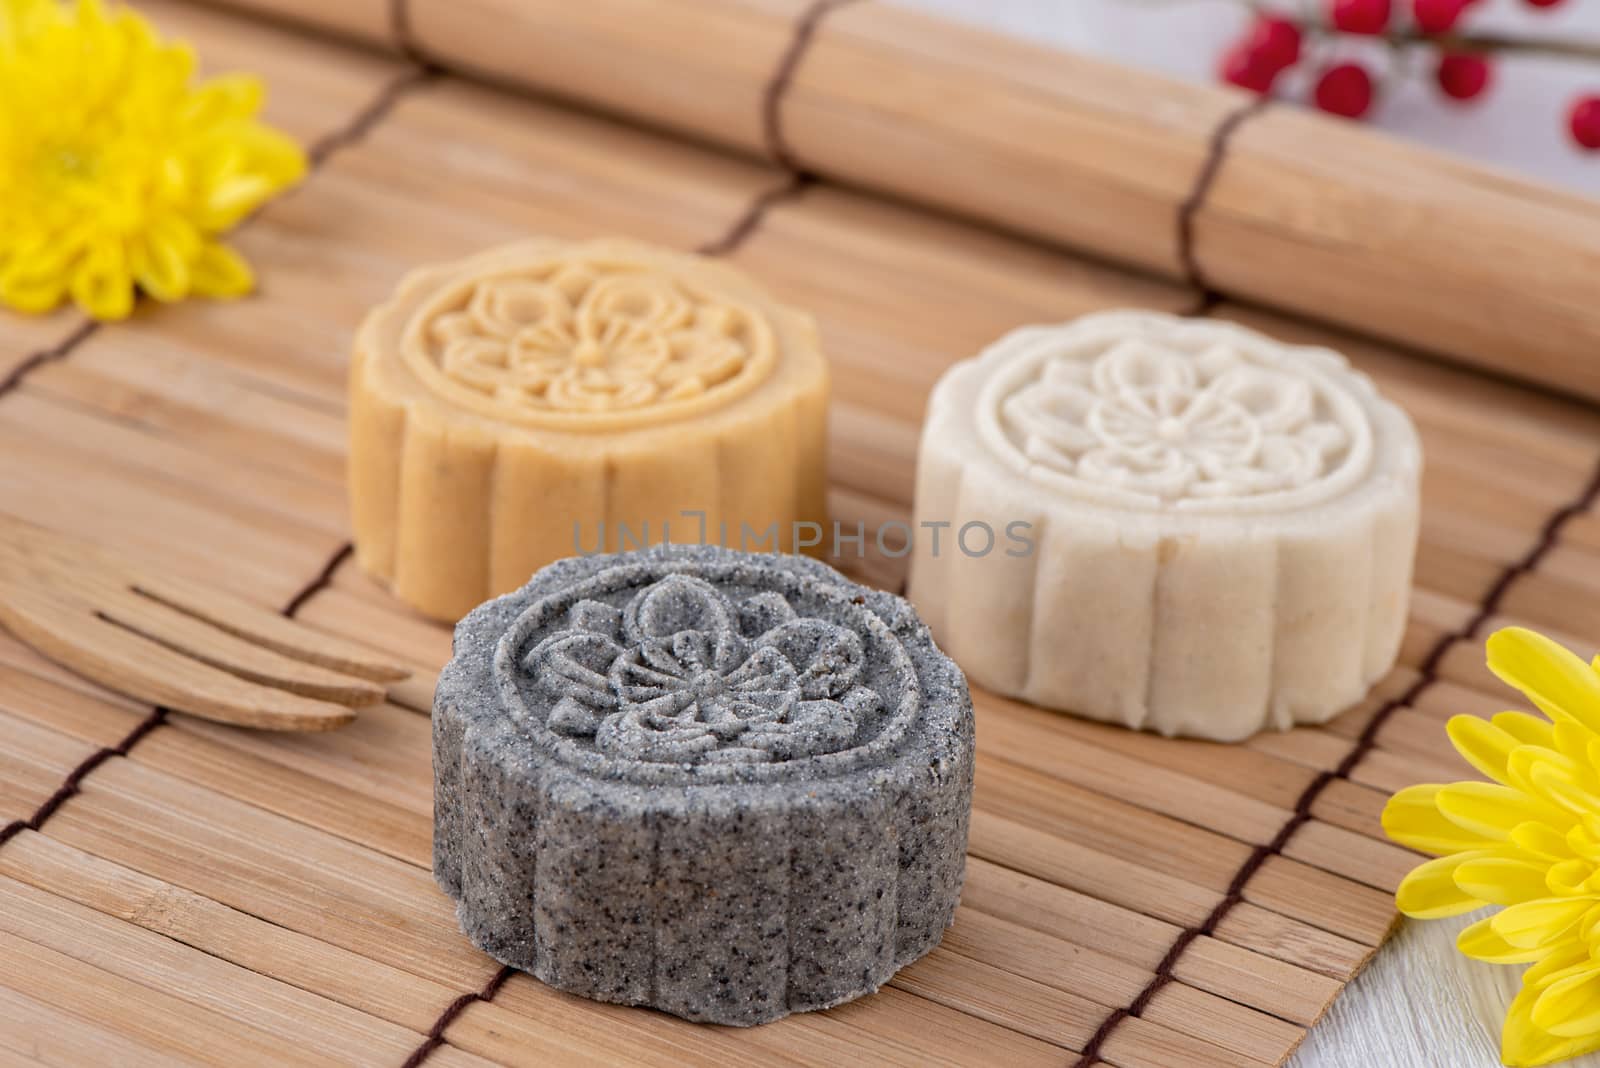 Colorful beautiful moon cake, mung bean cake, Champion Scholar Pastry cake for Mid-Autumn festival traditional gourmet dessert snack, close up.